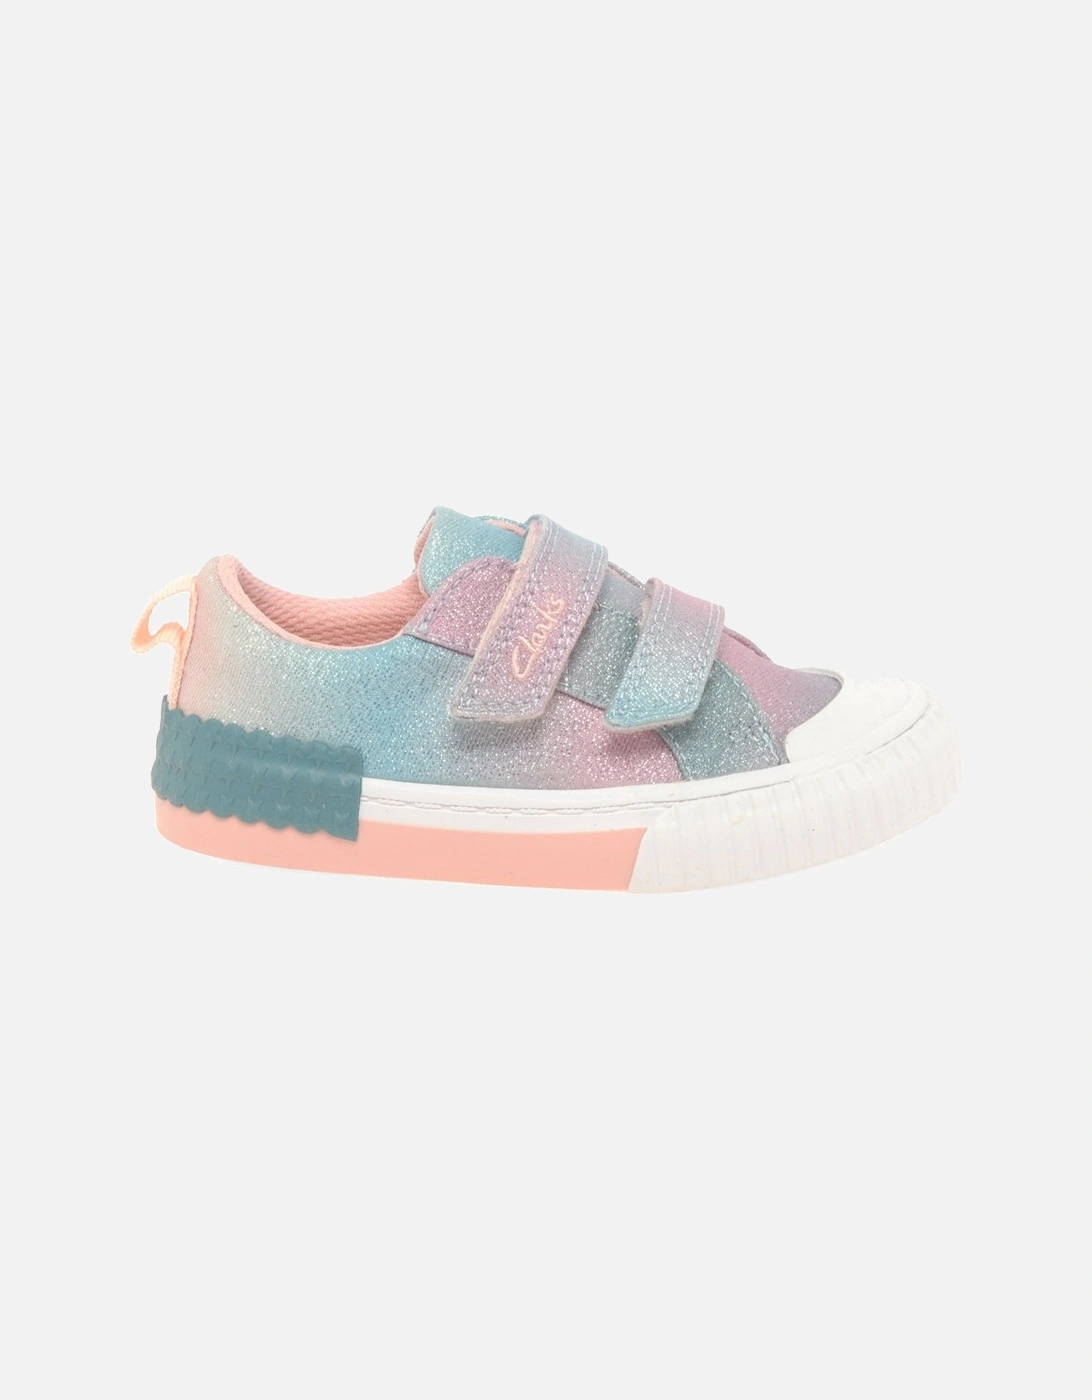 Foxing Brill K Girls Canvas Shoes